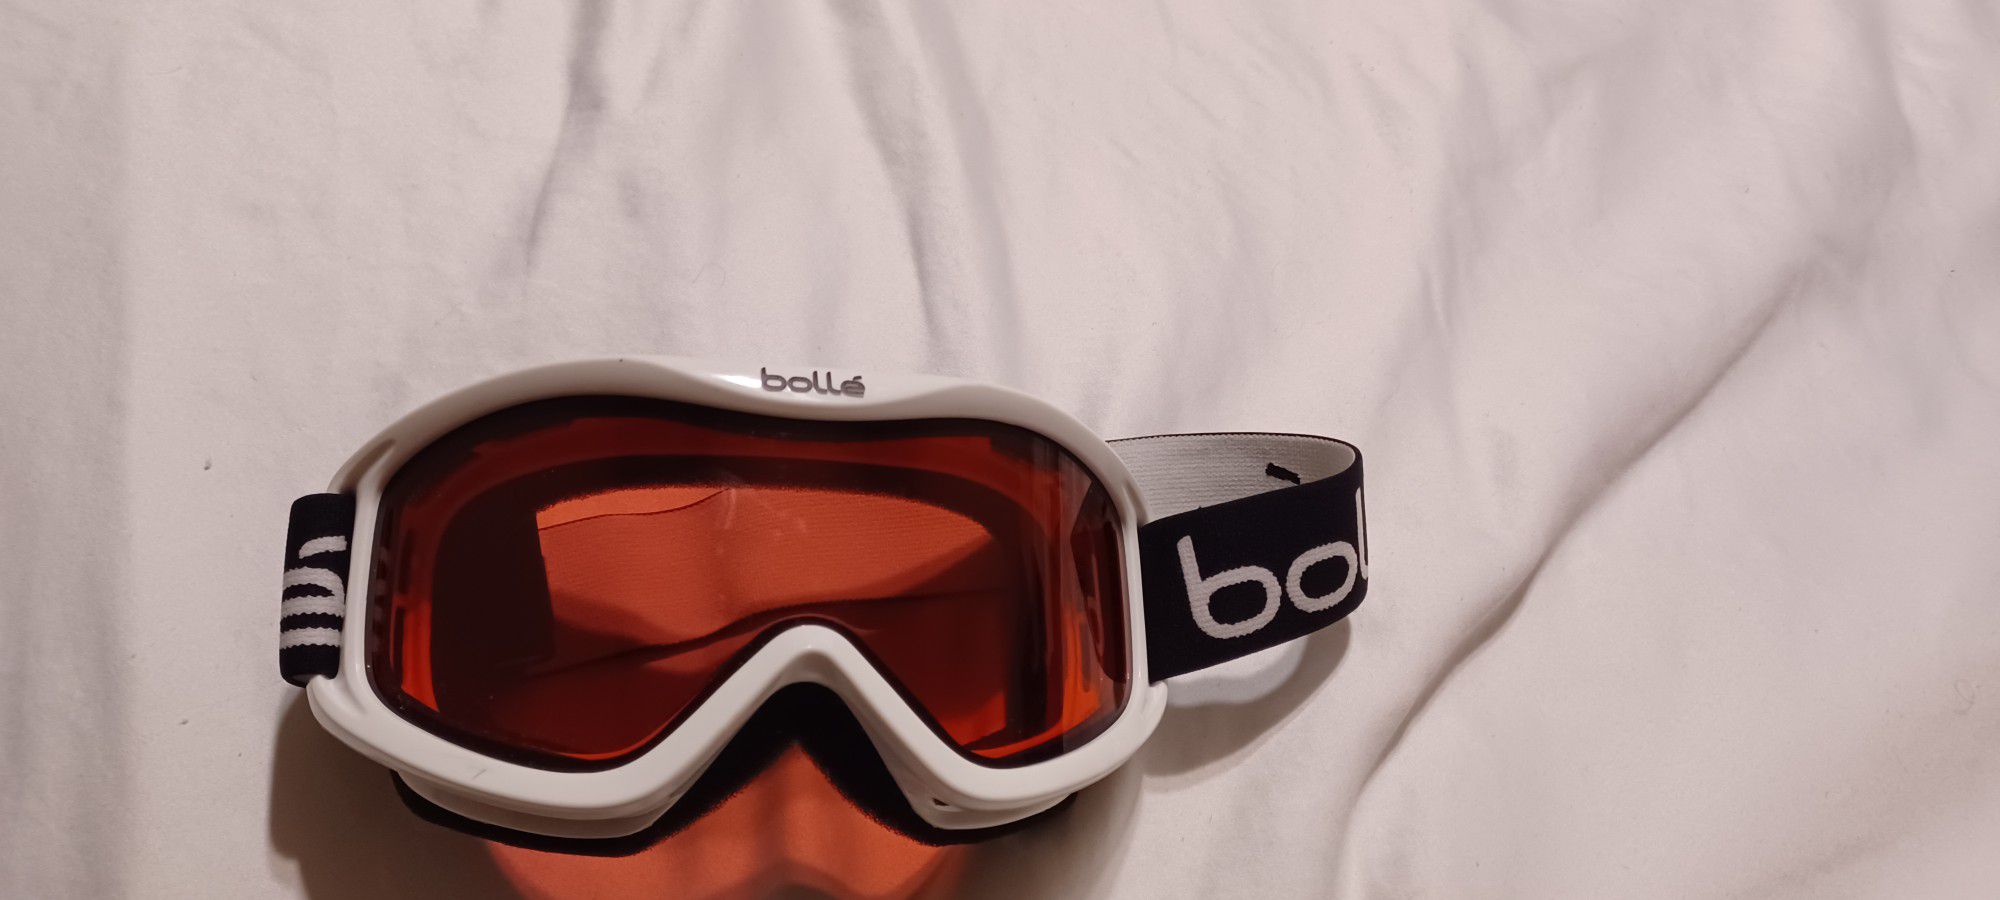 Bolle Ski And Snowboarding Goggles